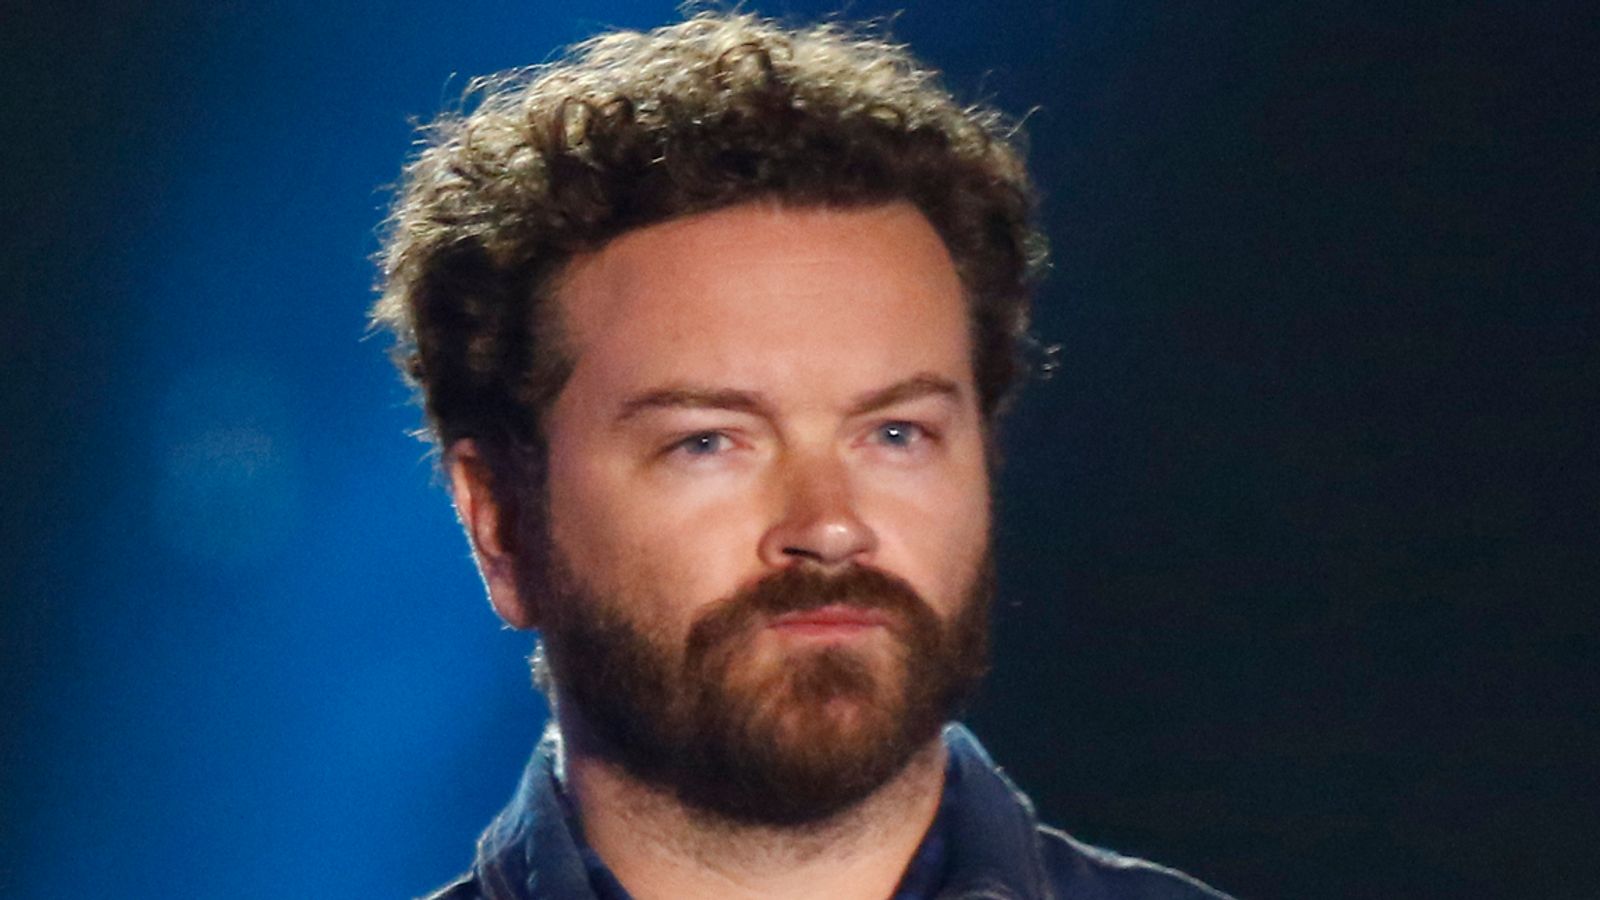 Danny Masterson: That 70's Show actor given 30 years to life in prison for raping two women